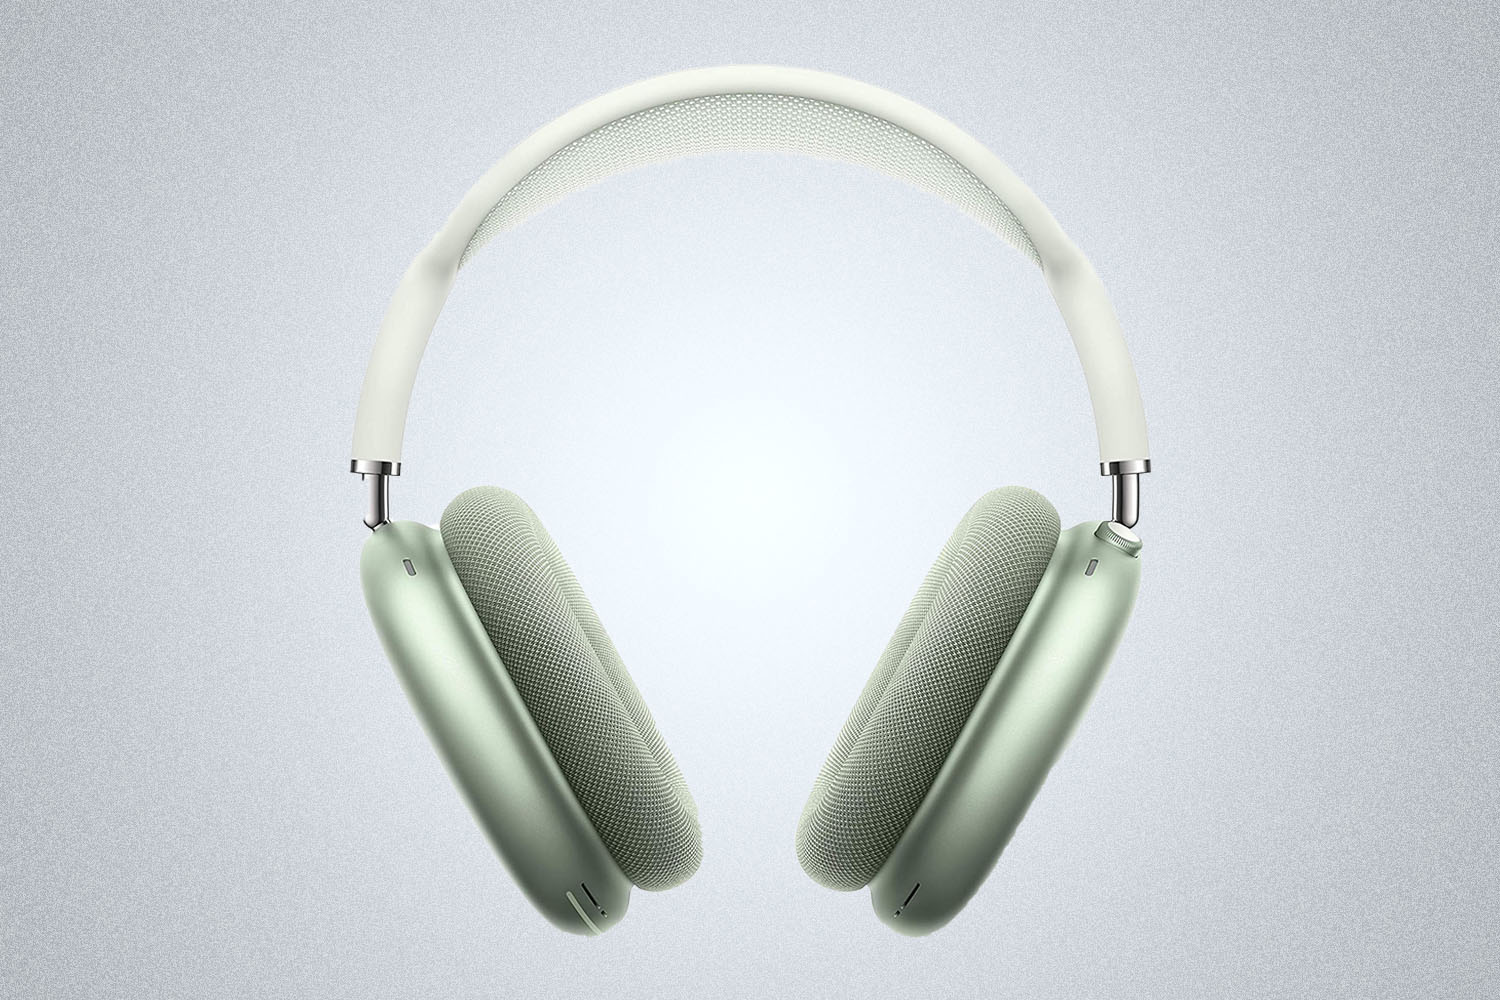 a pair of green Apple AirPod Max headphones on a grey background